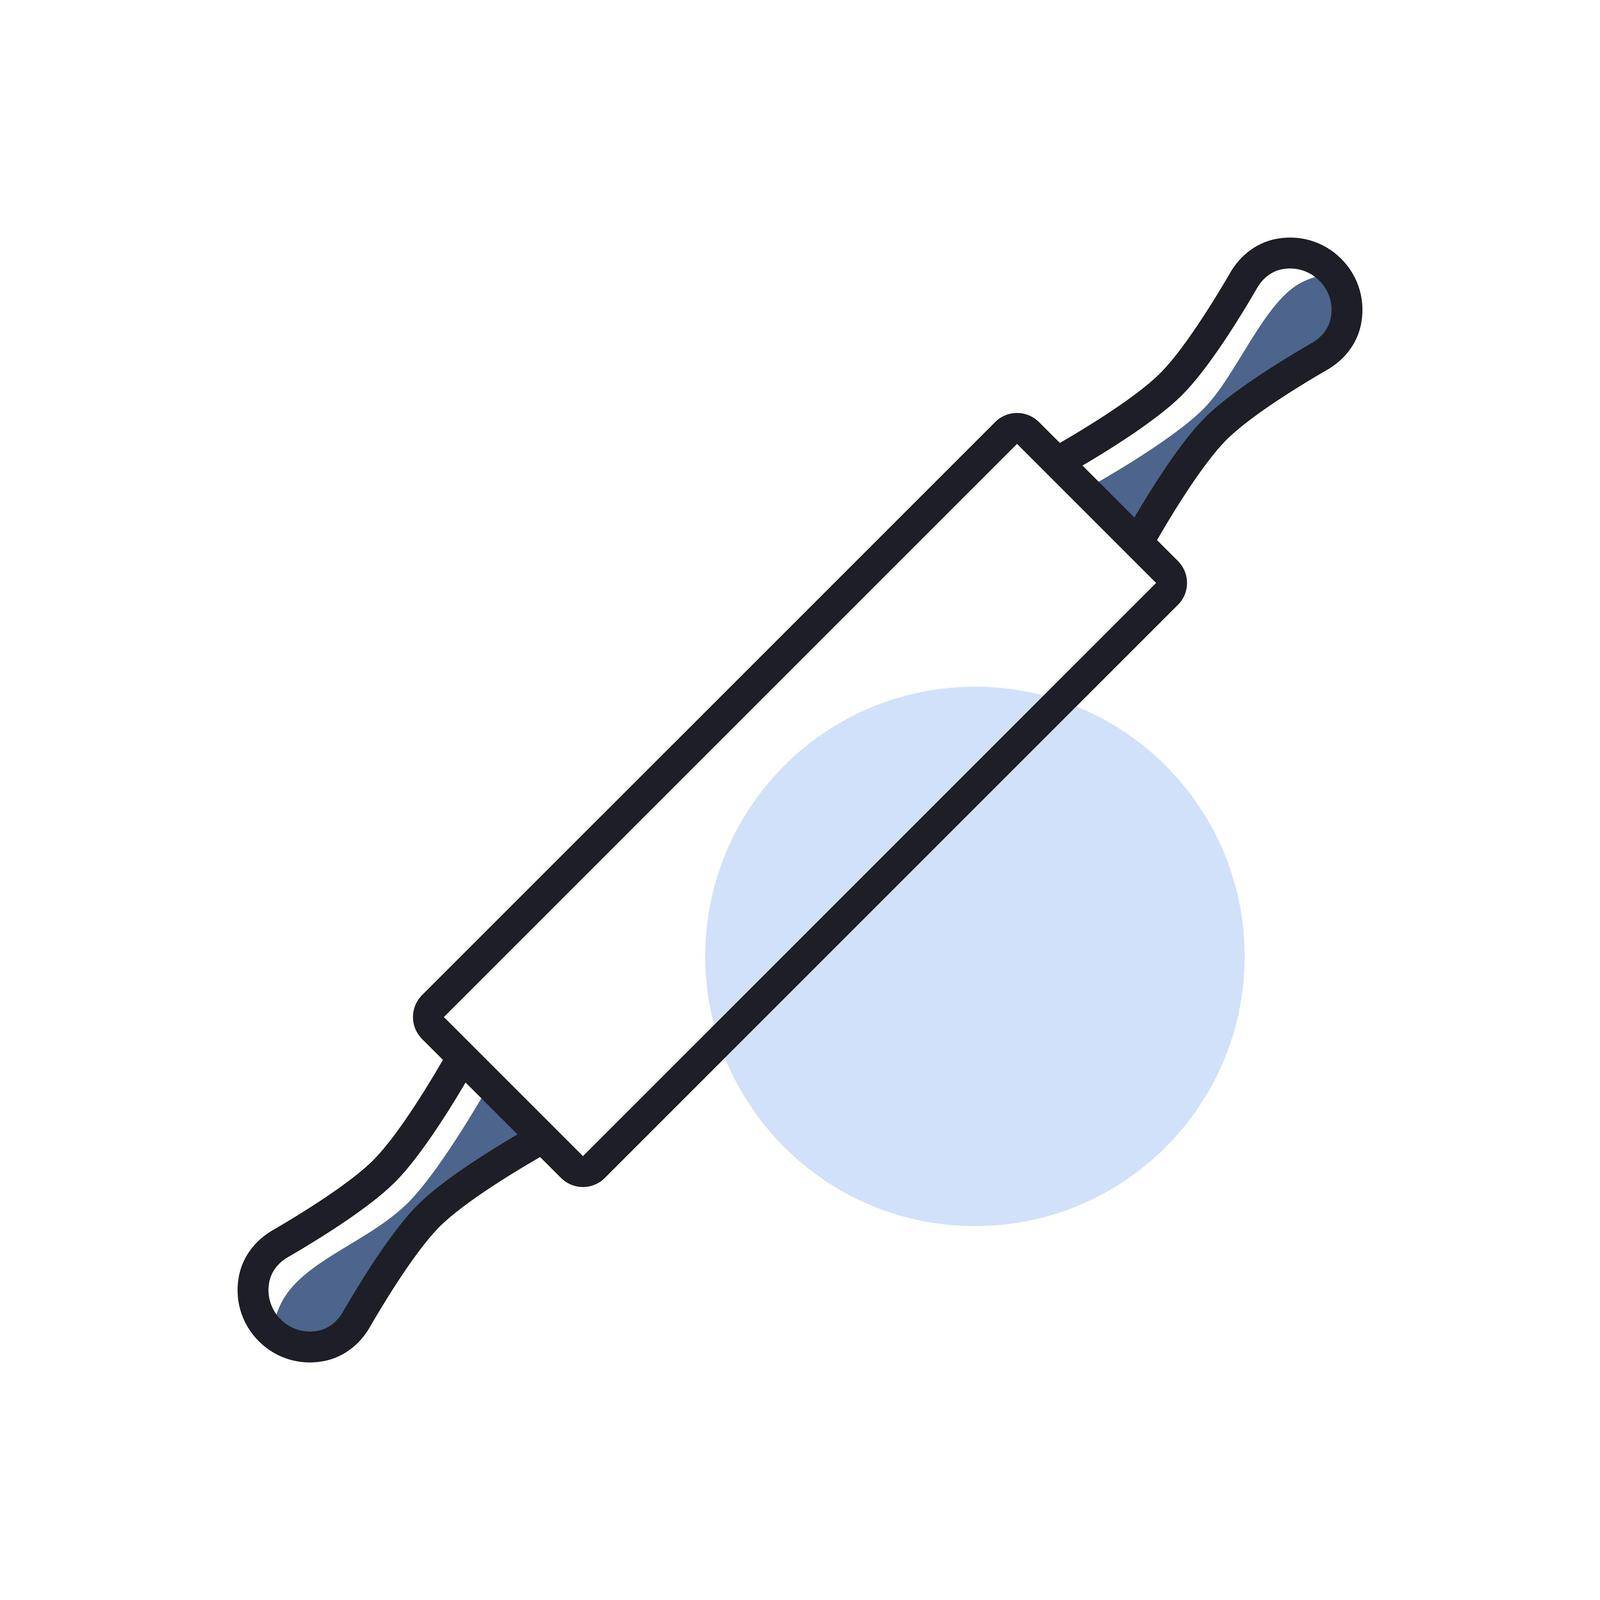 Wooden rolling pin plunger vector icon by nosik